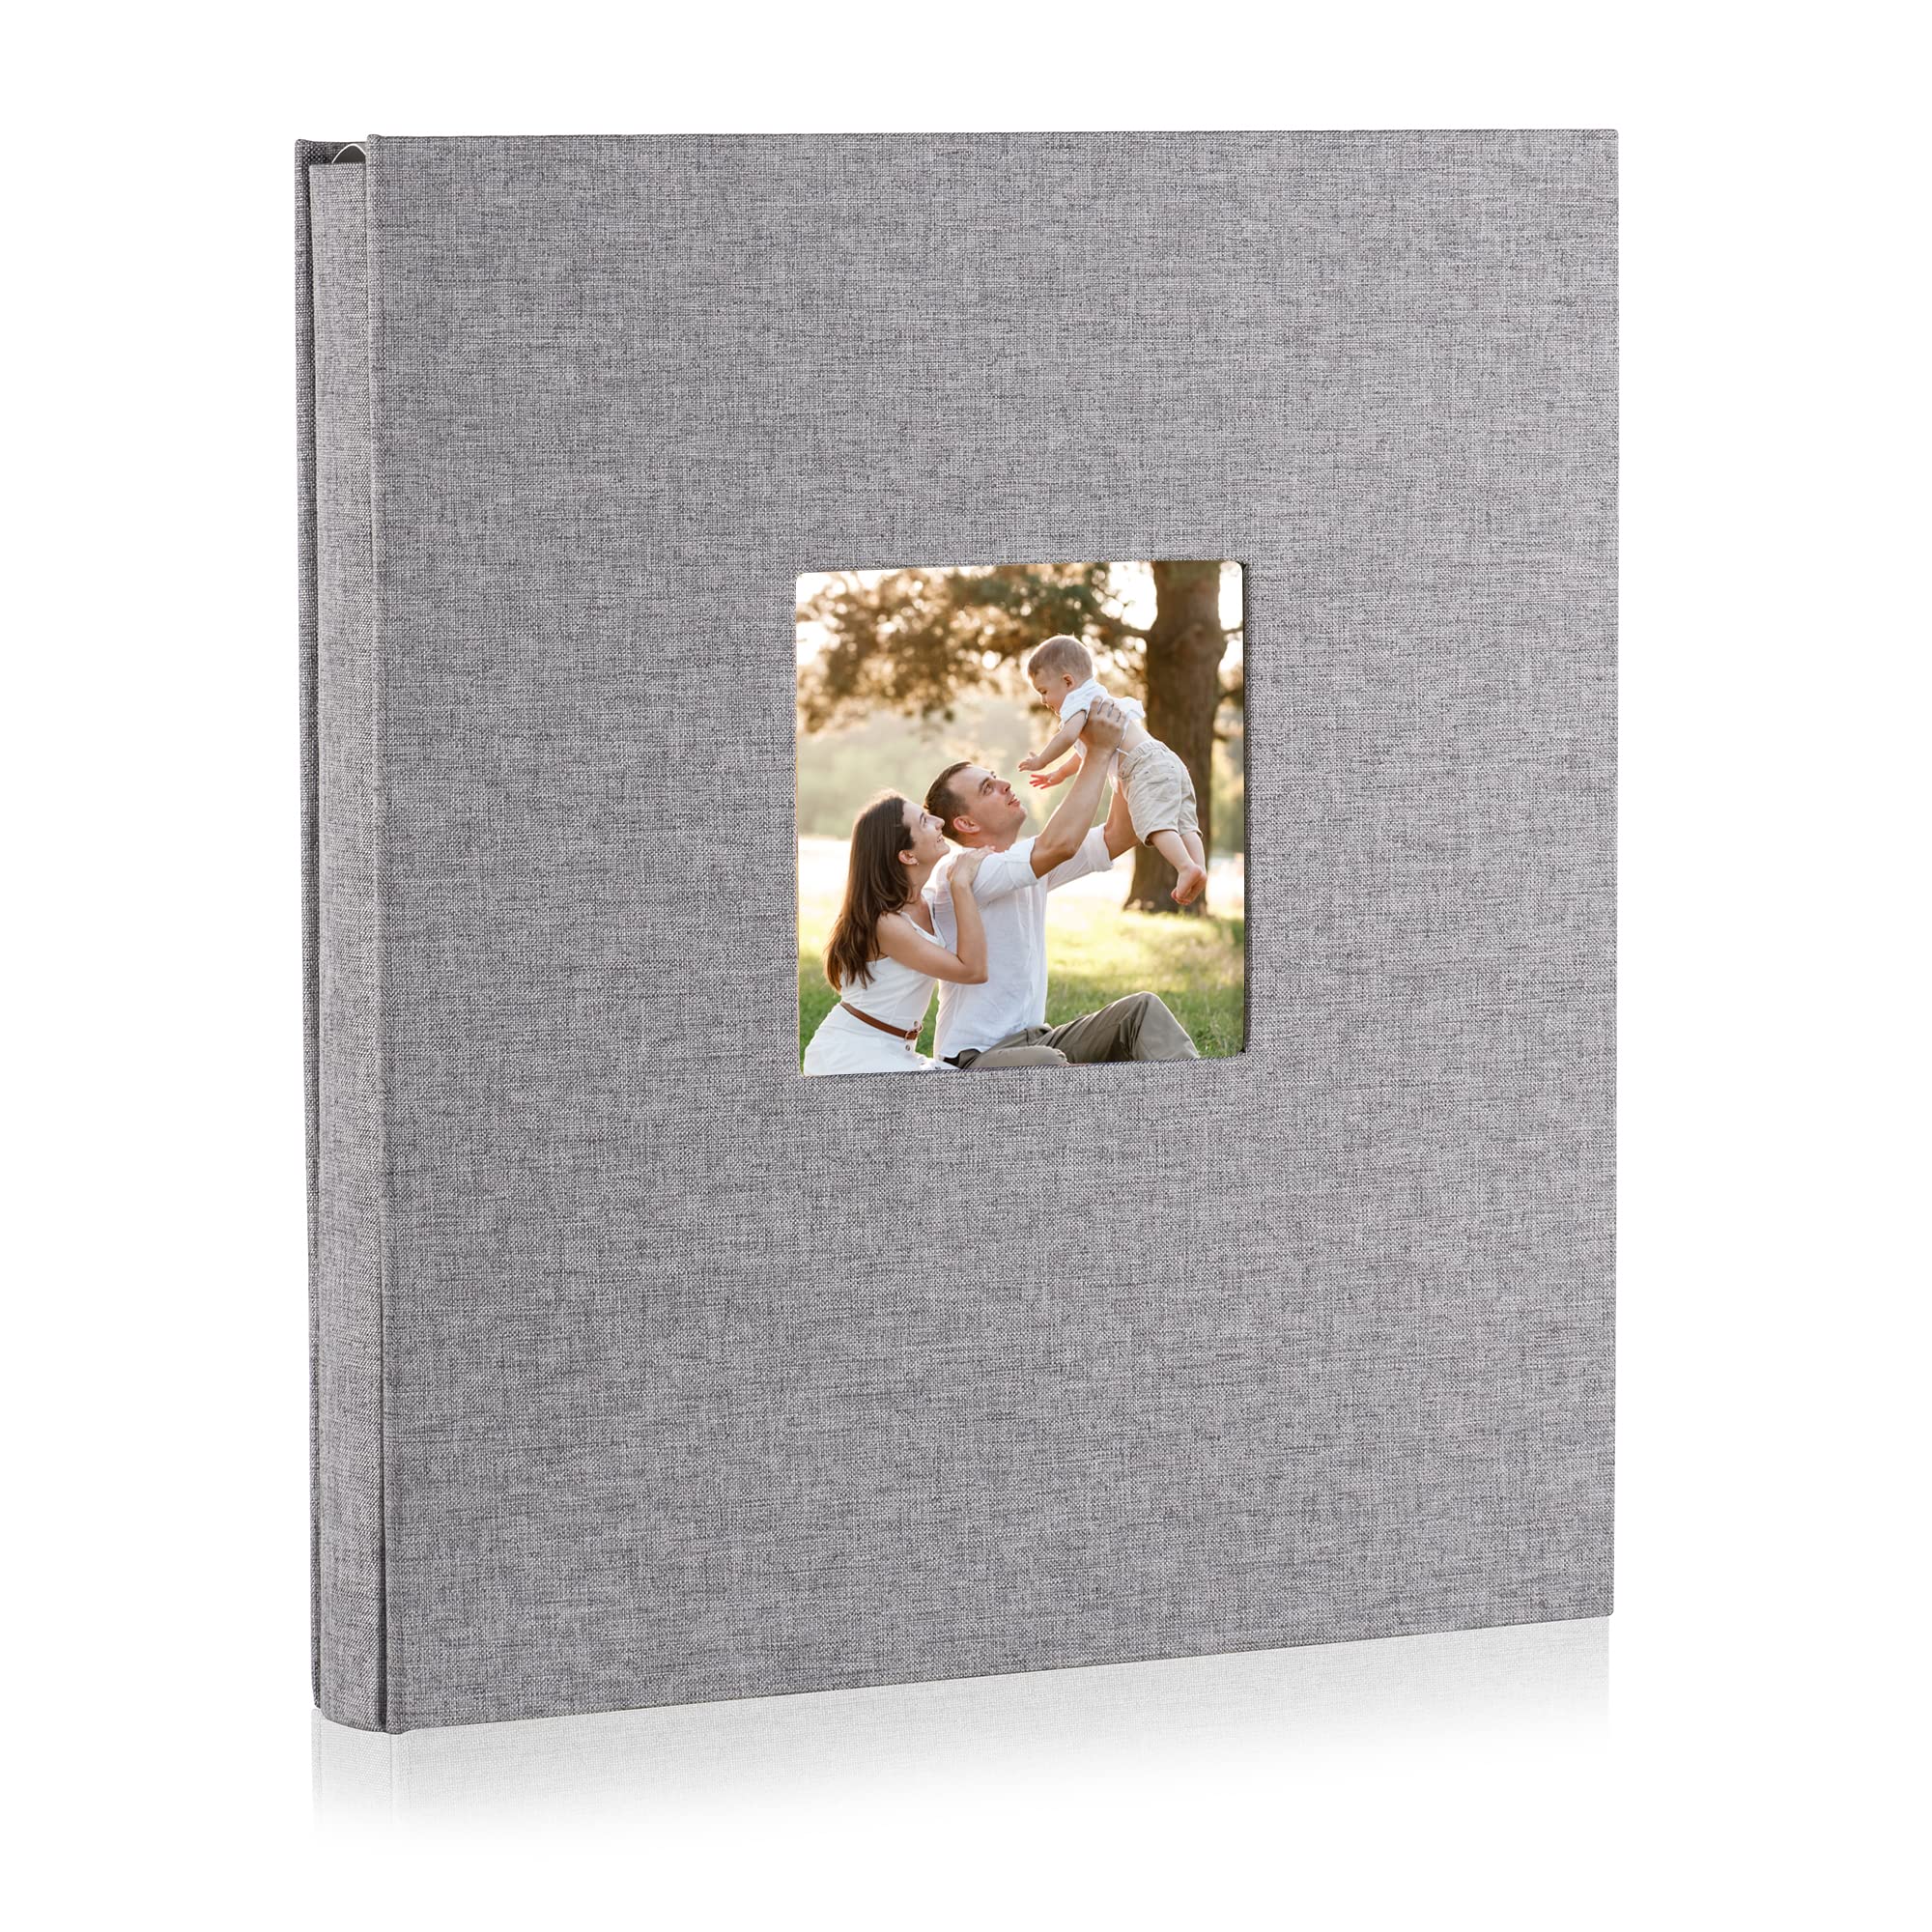 Print File G Archival Photo Album Pages, 4x6in Prints 0600900